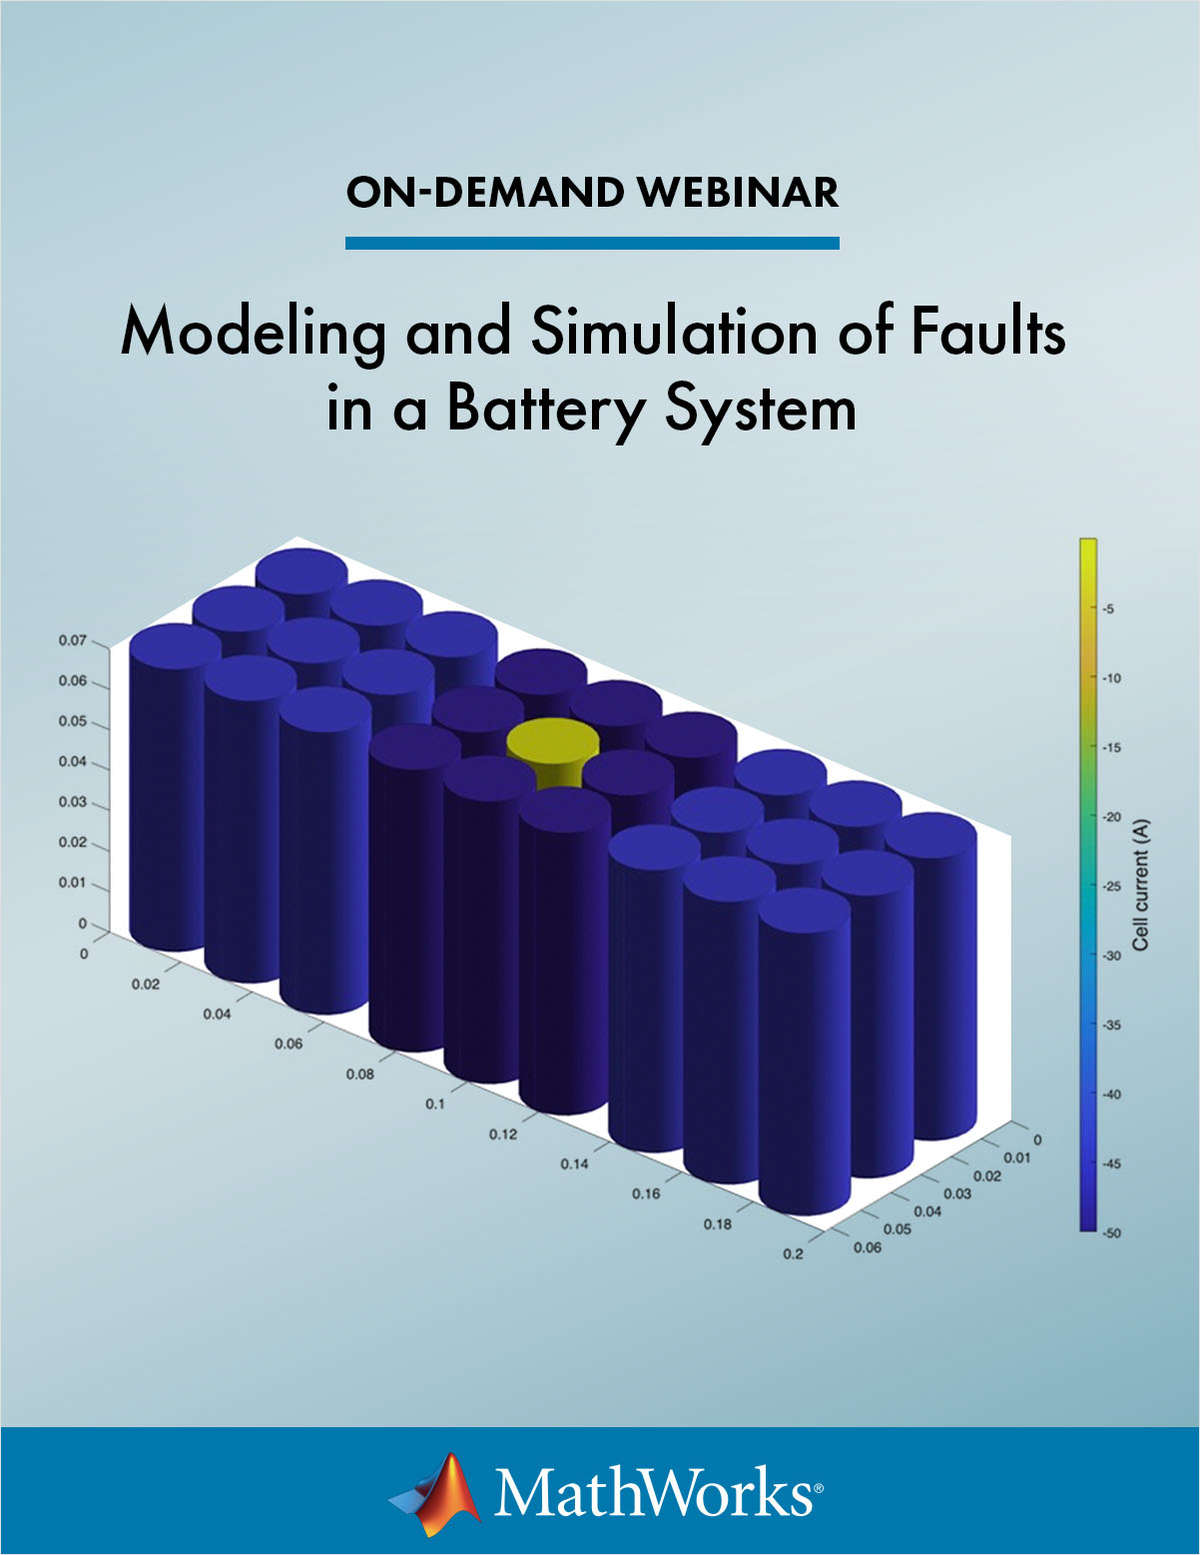 Modeling and Simulation of Faults in a Battery System